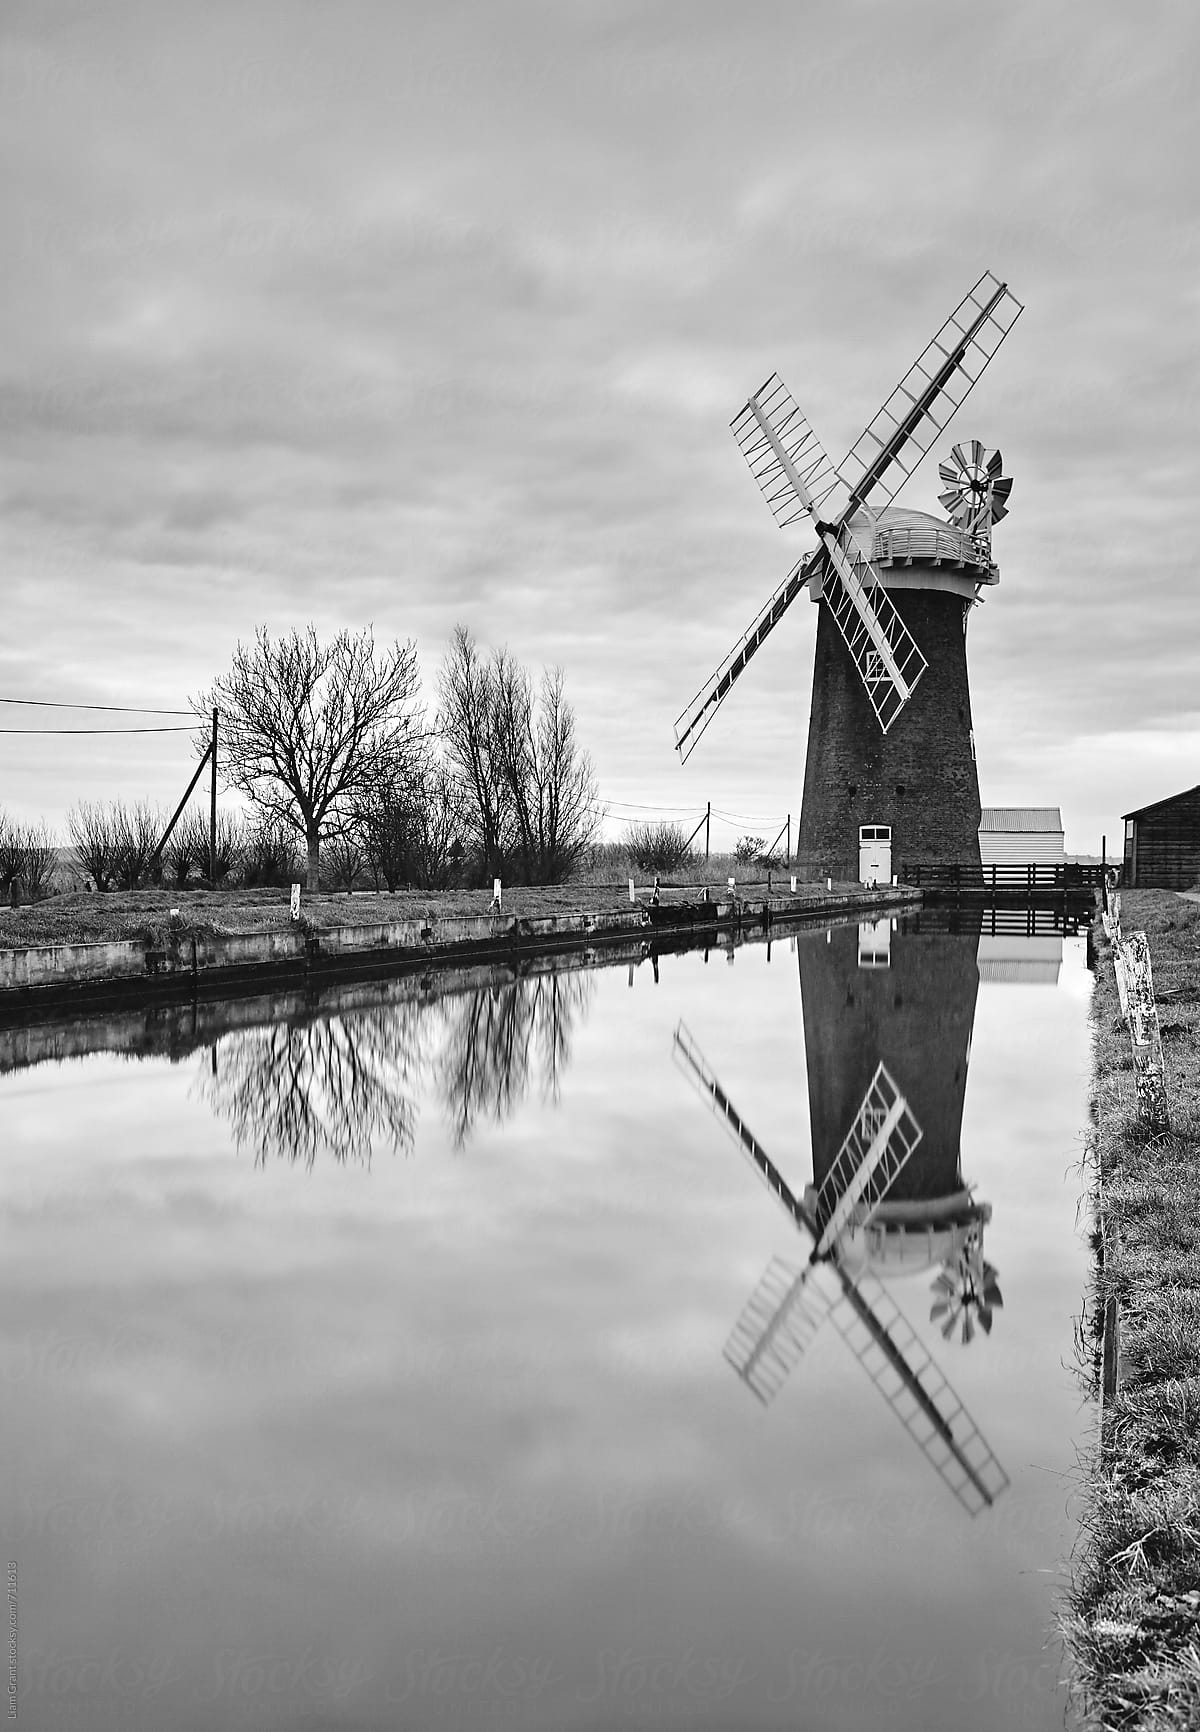 Old windmill on the Norfolk Broads, UK.